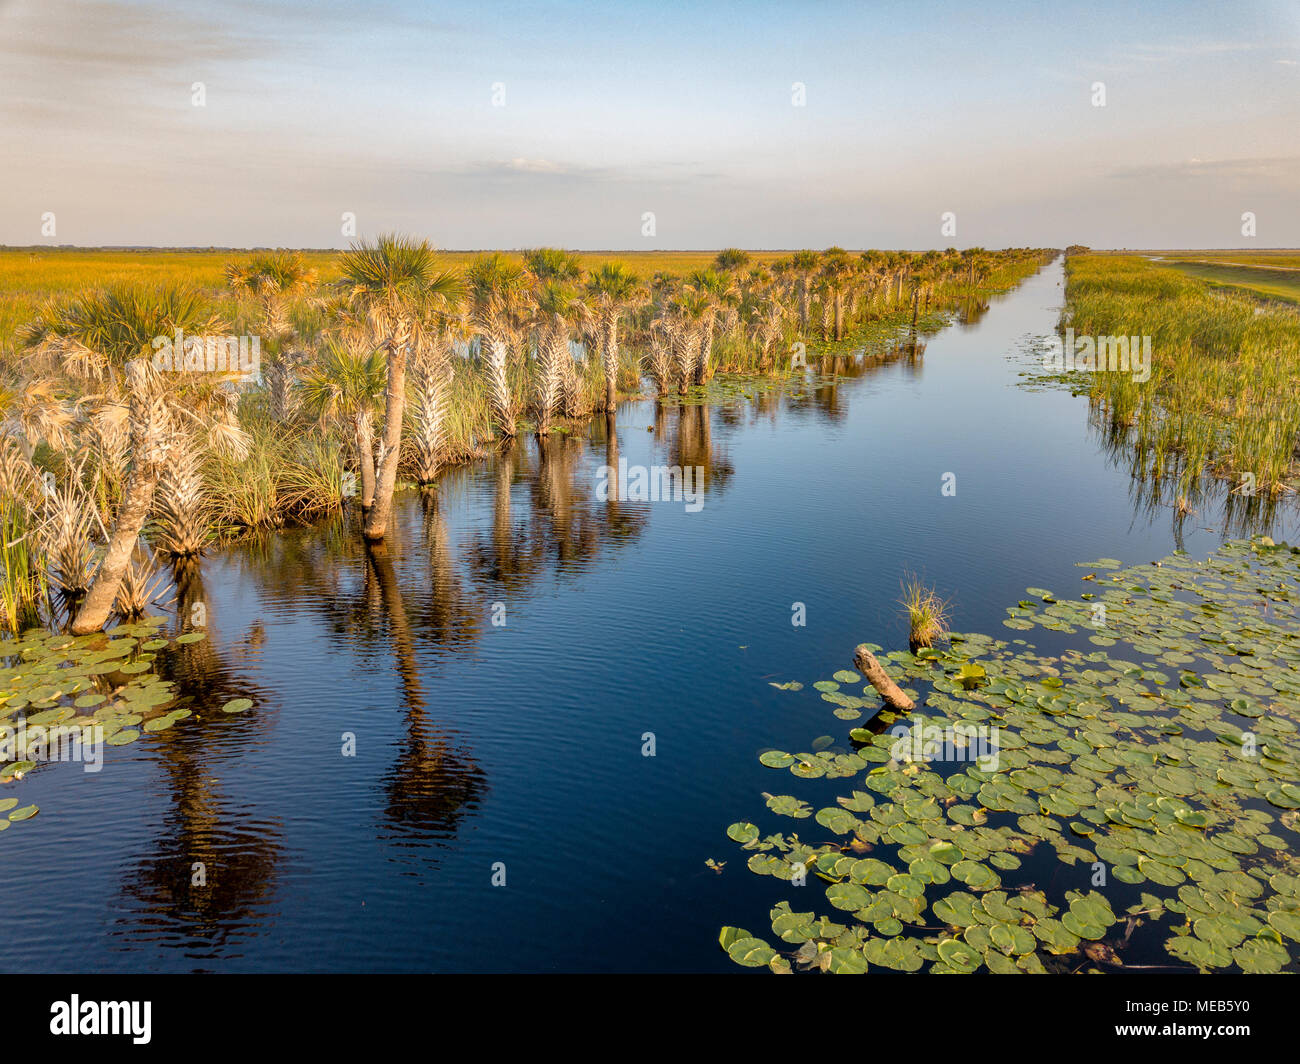 There are many waterways and canals in the wetland areas of brevard county florida where boaters use the routes to reach the local lakes Stock Photo